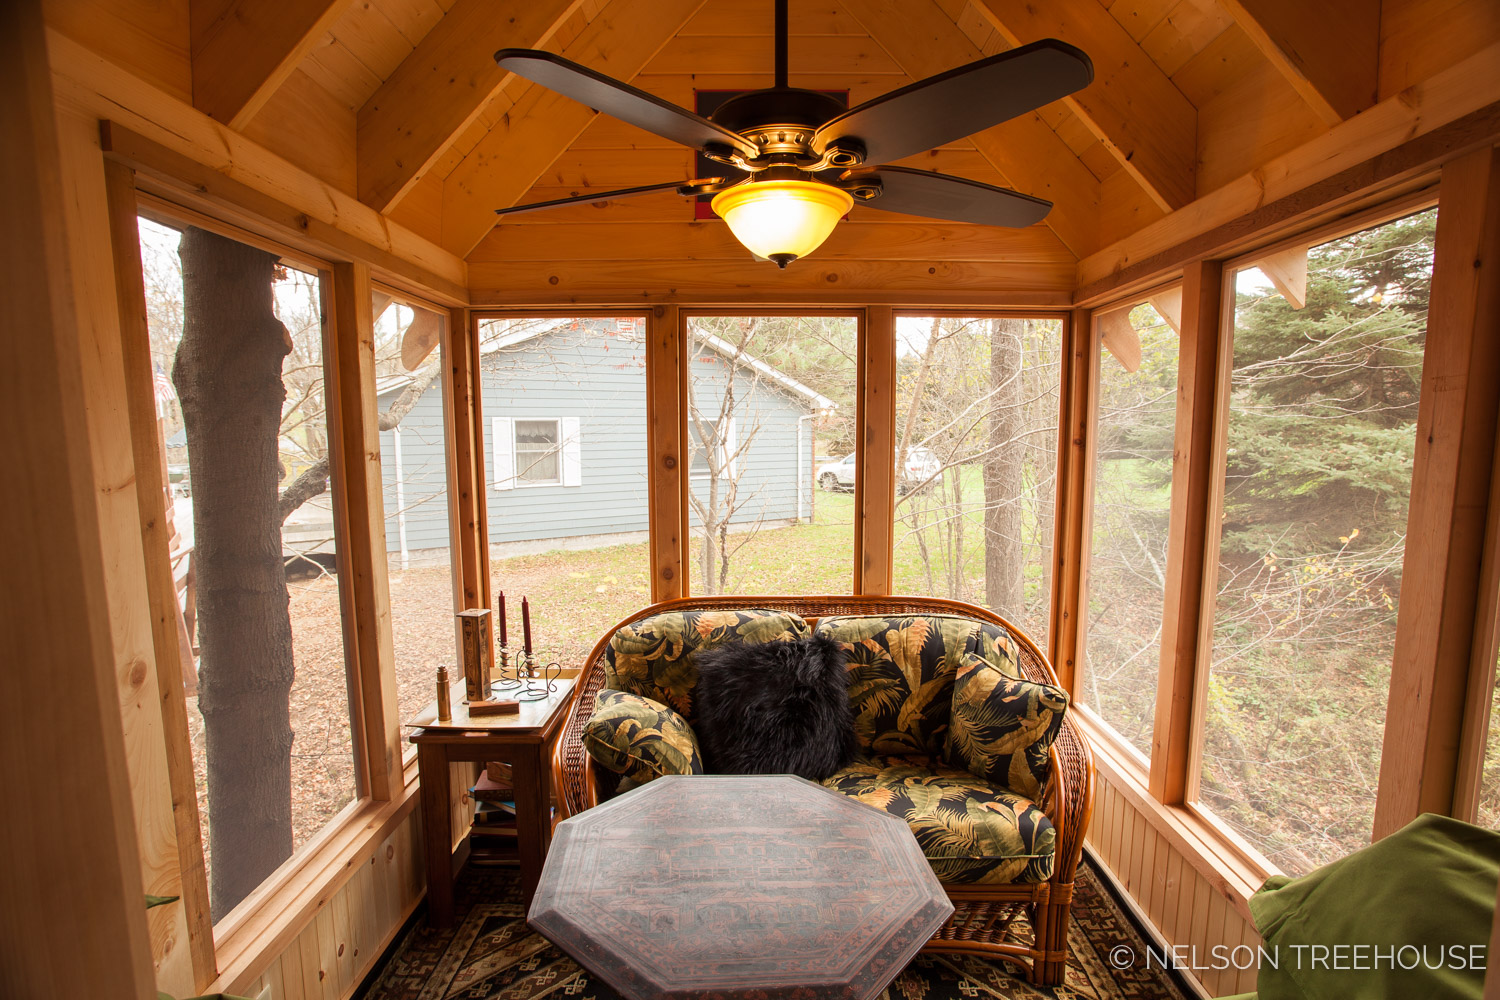  Nelson Treehouse - Adventure TEmple Screened-in Porch 